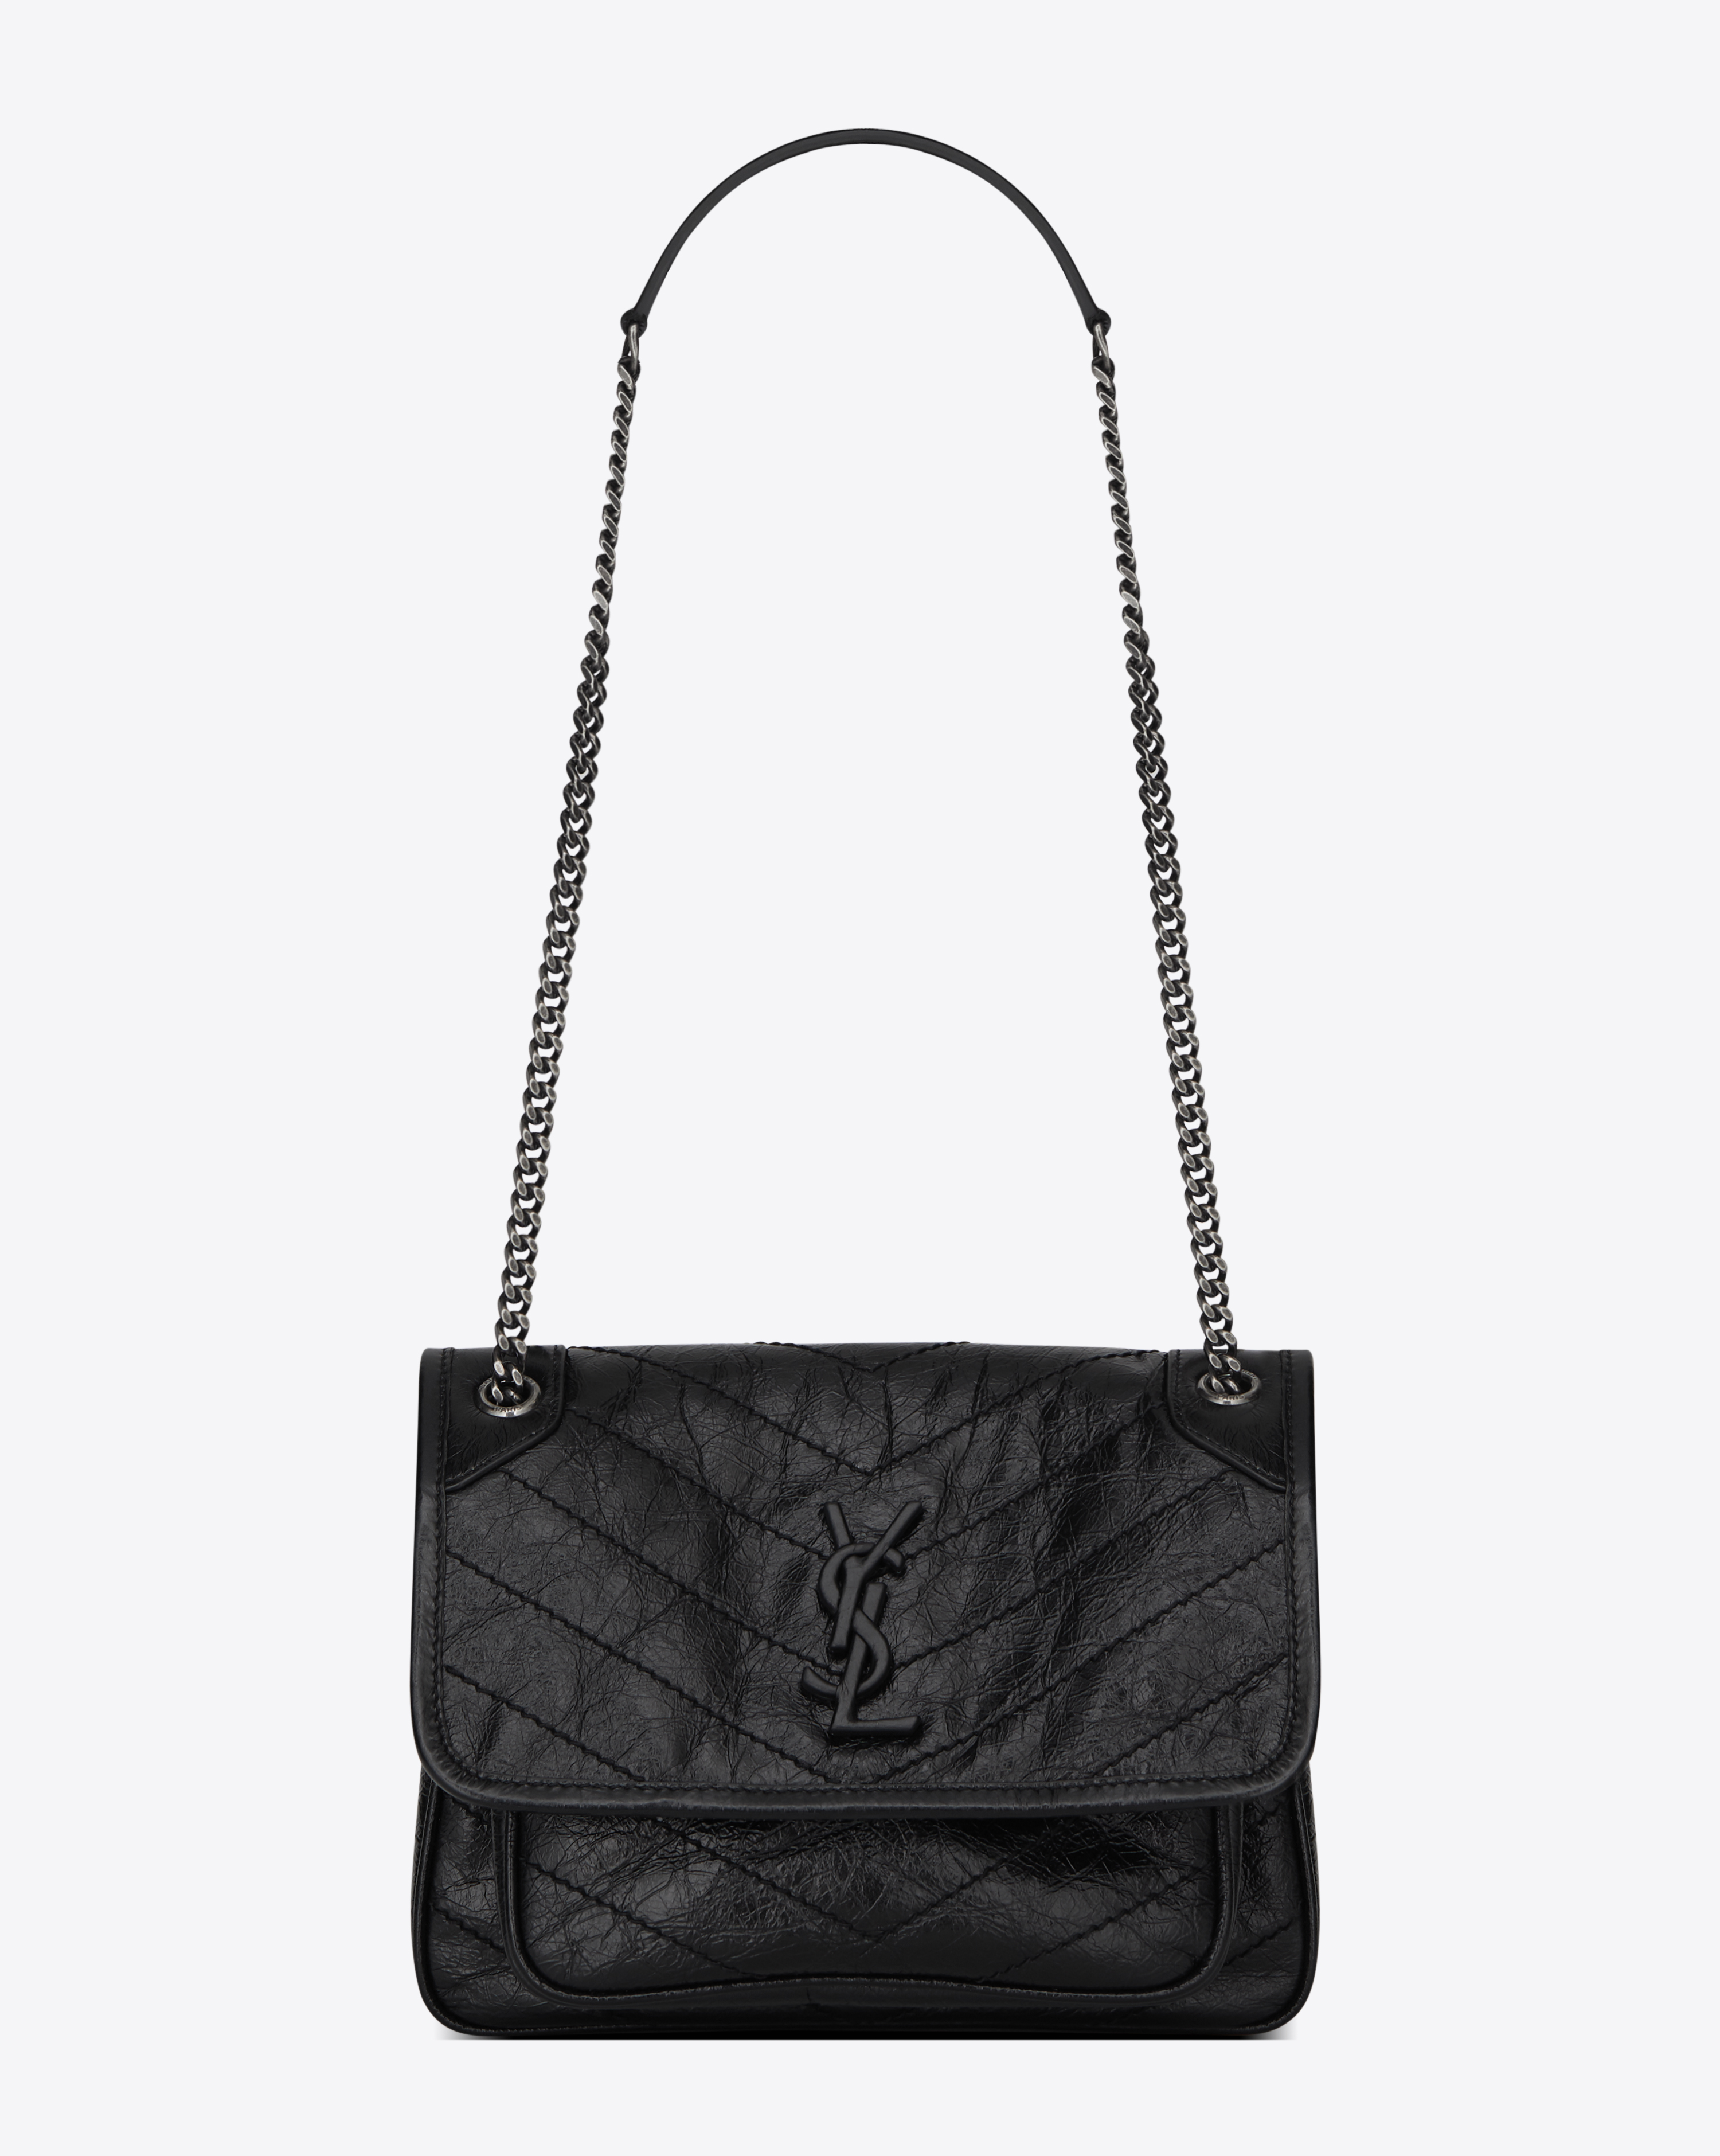 Baby Niki chain bag in black textured quilted leather.
